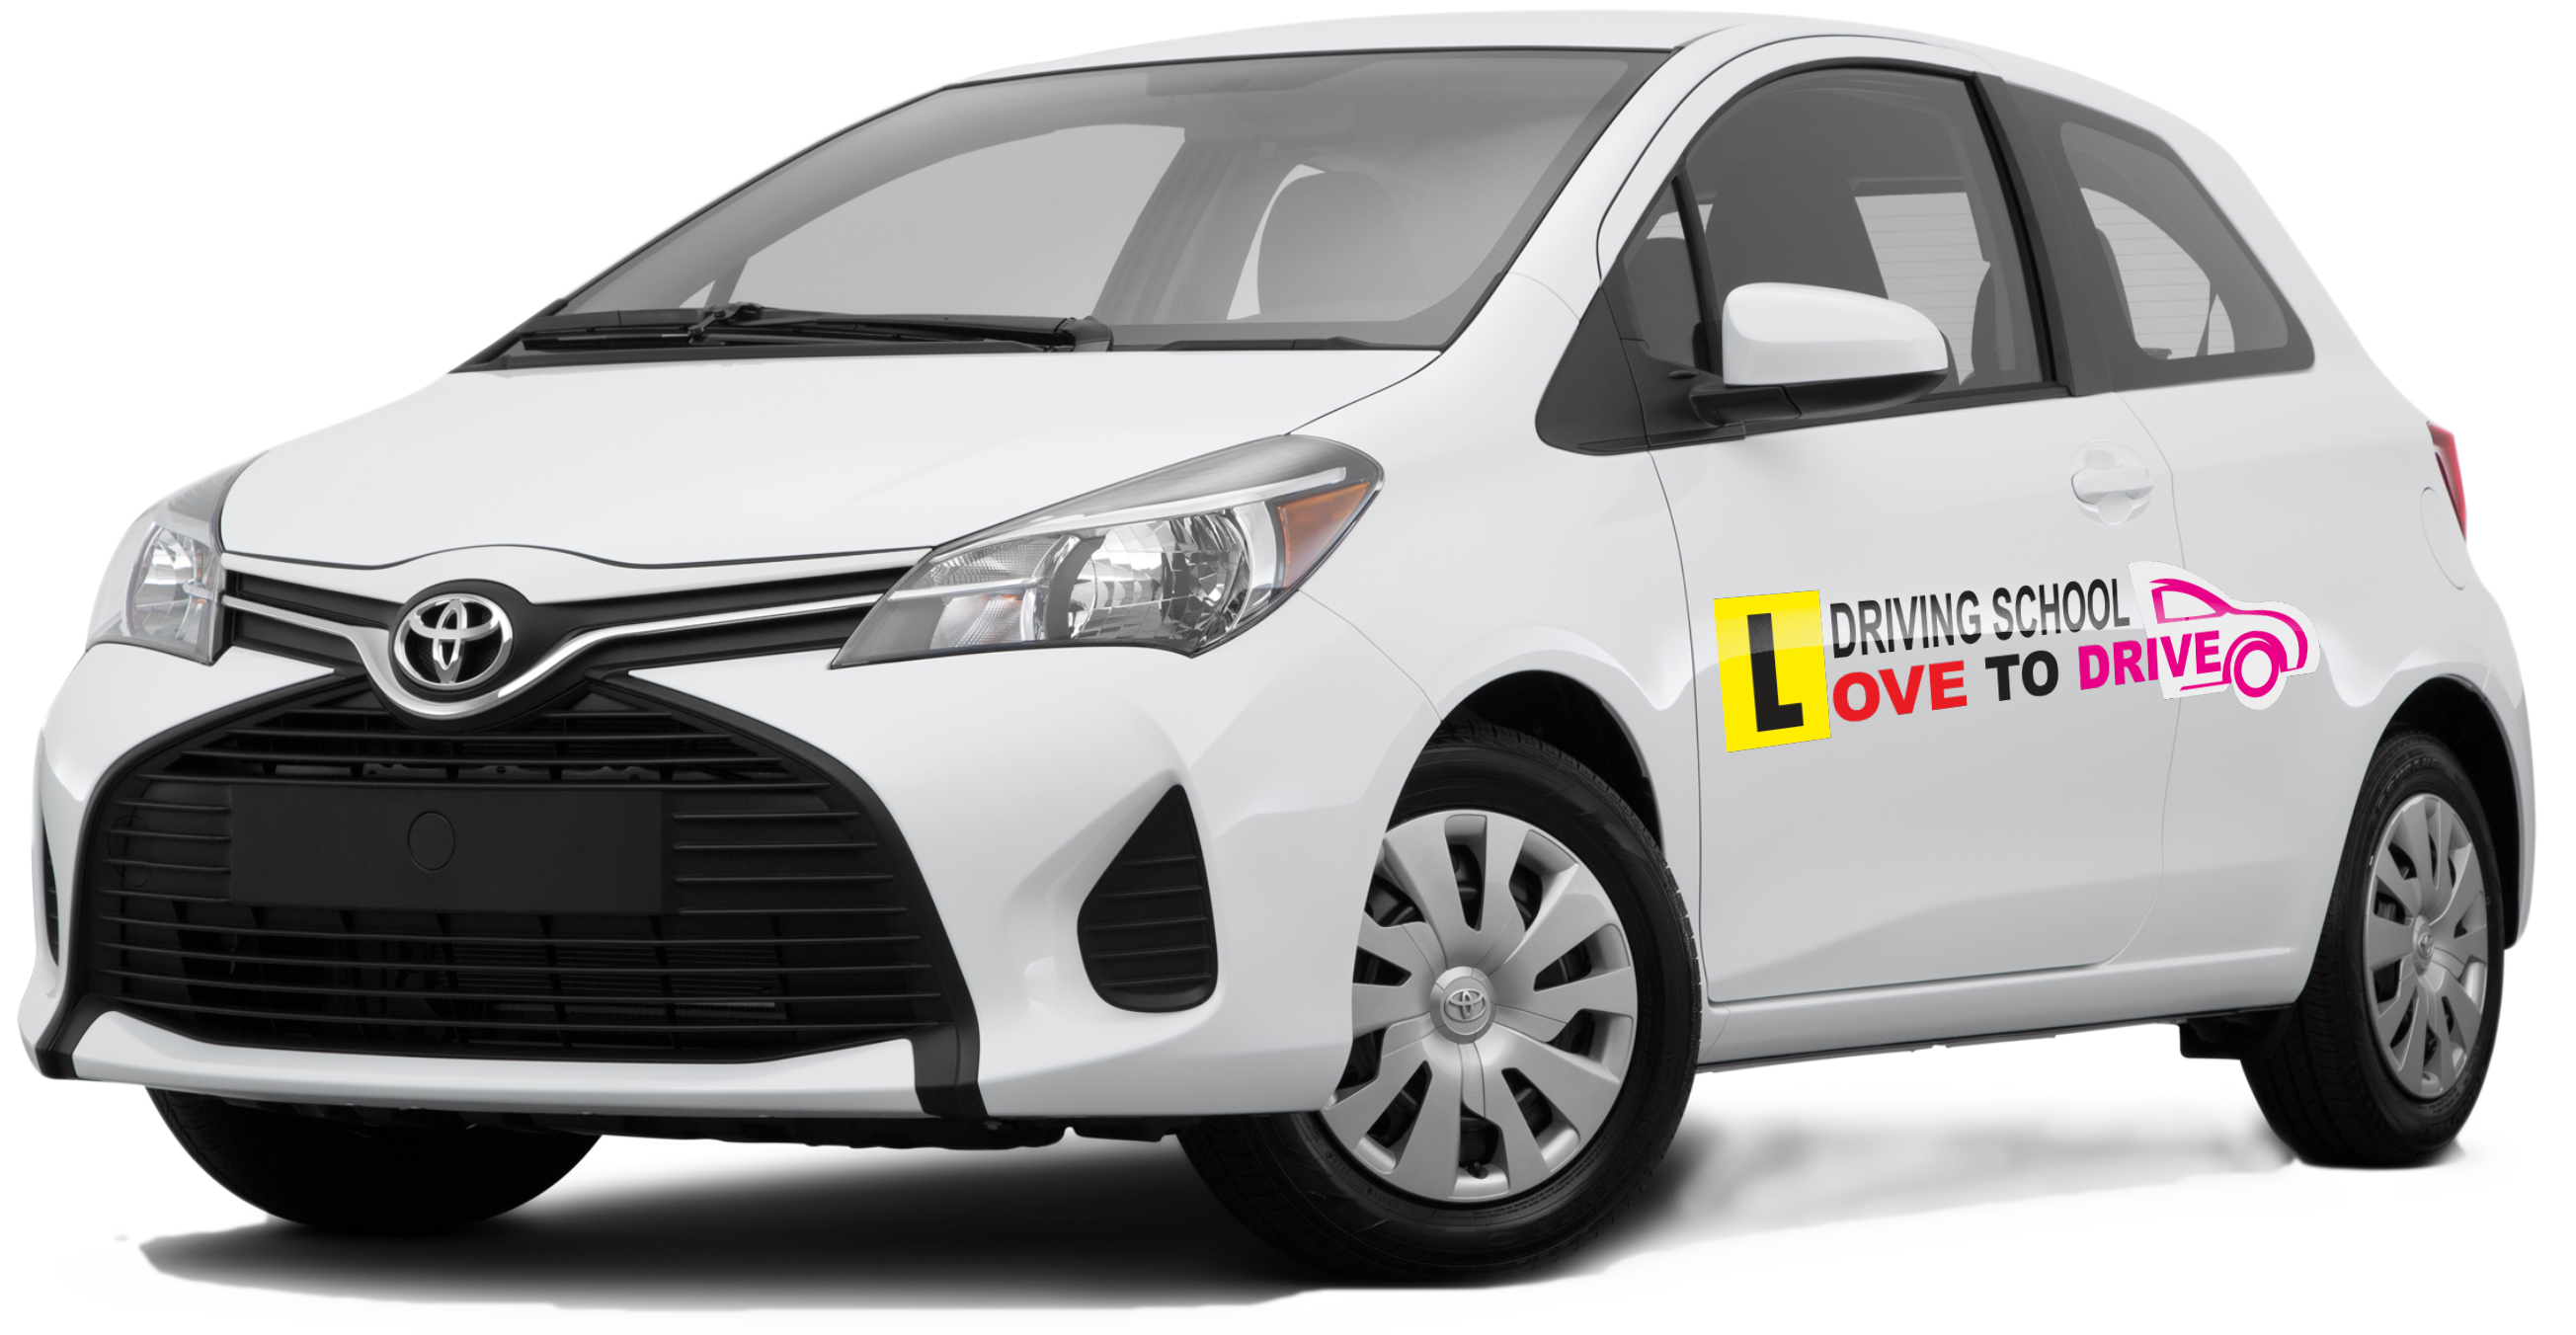 Car image of love to drive driving school